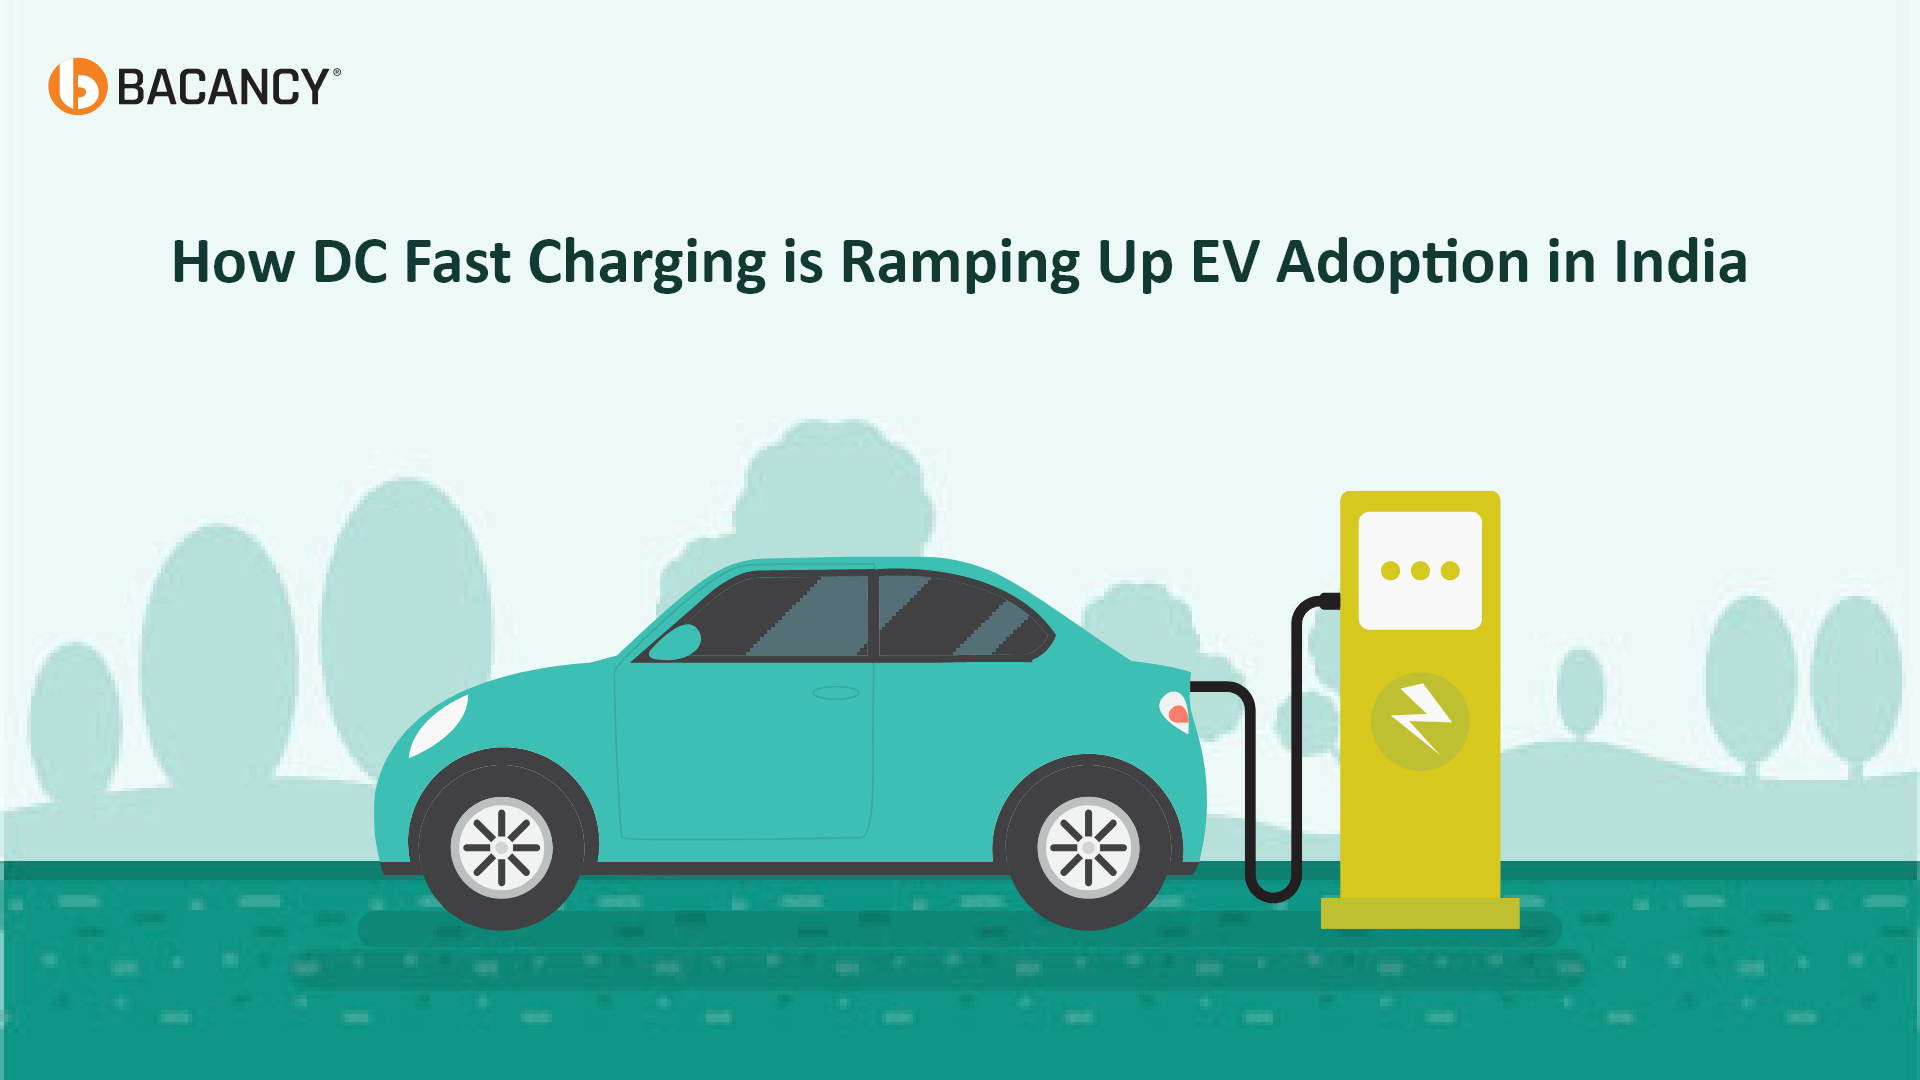 https://e-vehicleinfo.com/how-dc-fast-charging-is-ramping-up-ev-adoption-in-india/